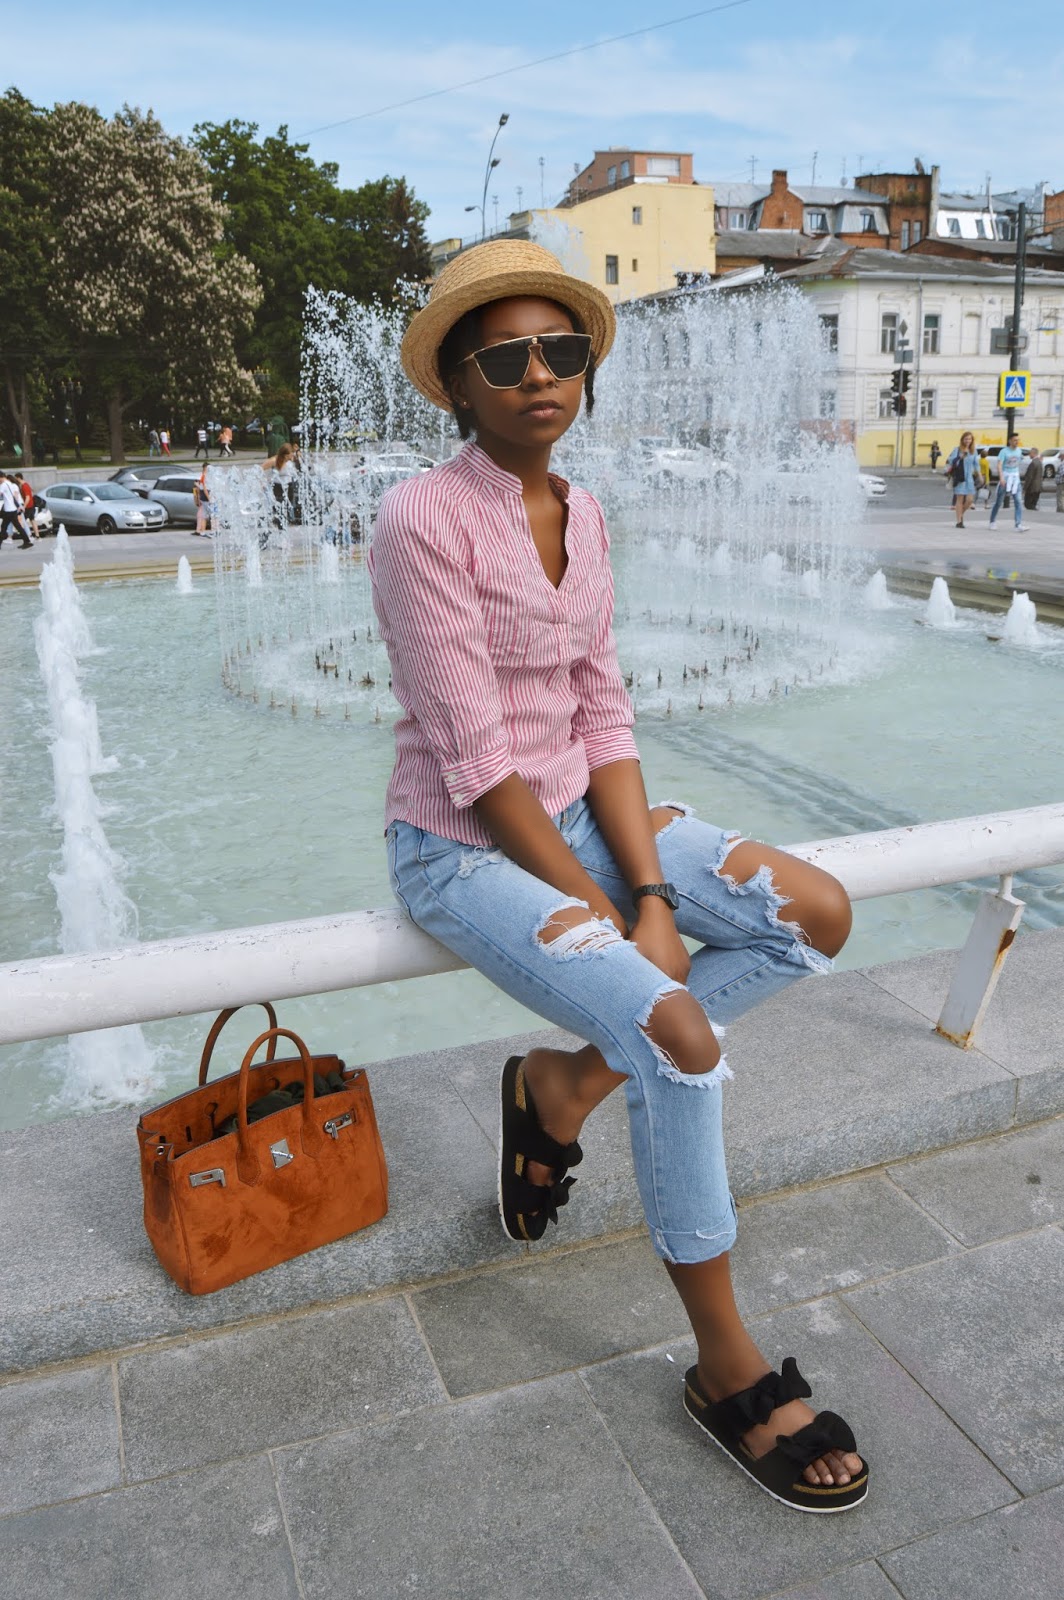 What to wear for a walking tour?: Blue jeans, straw hat, sunglass and Birkenstocks 